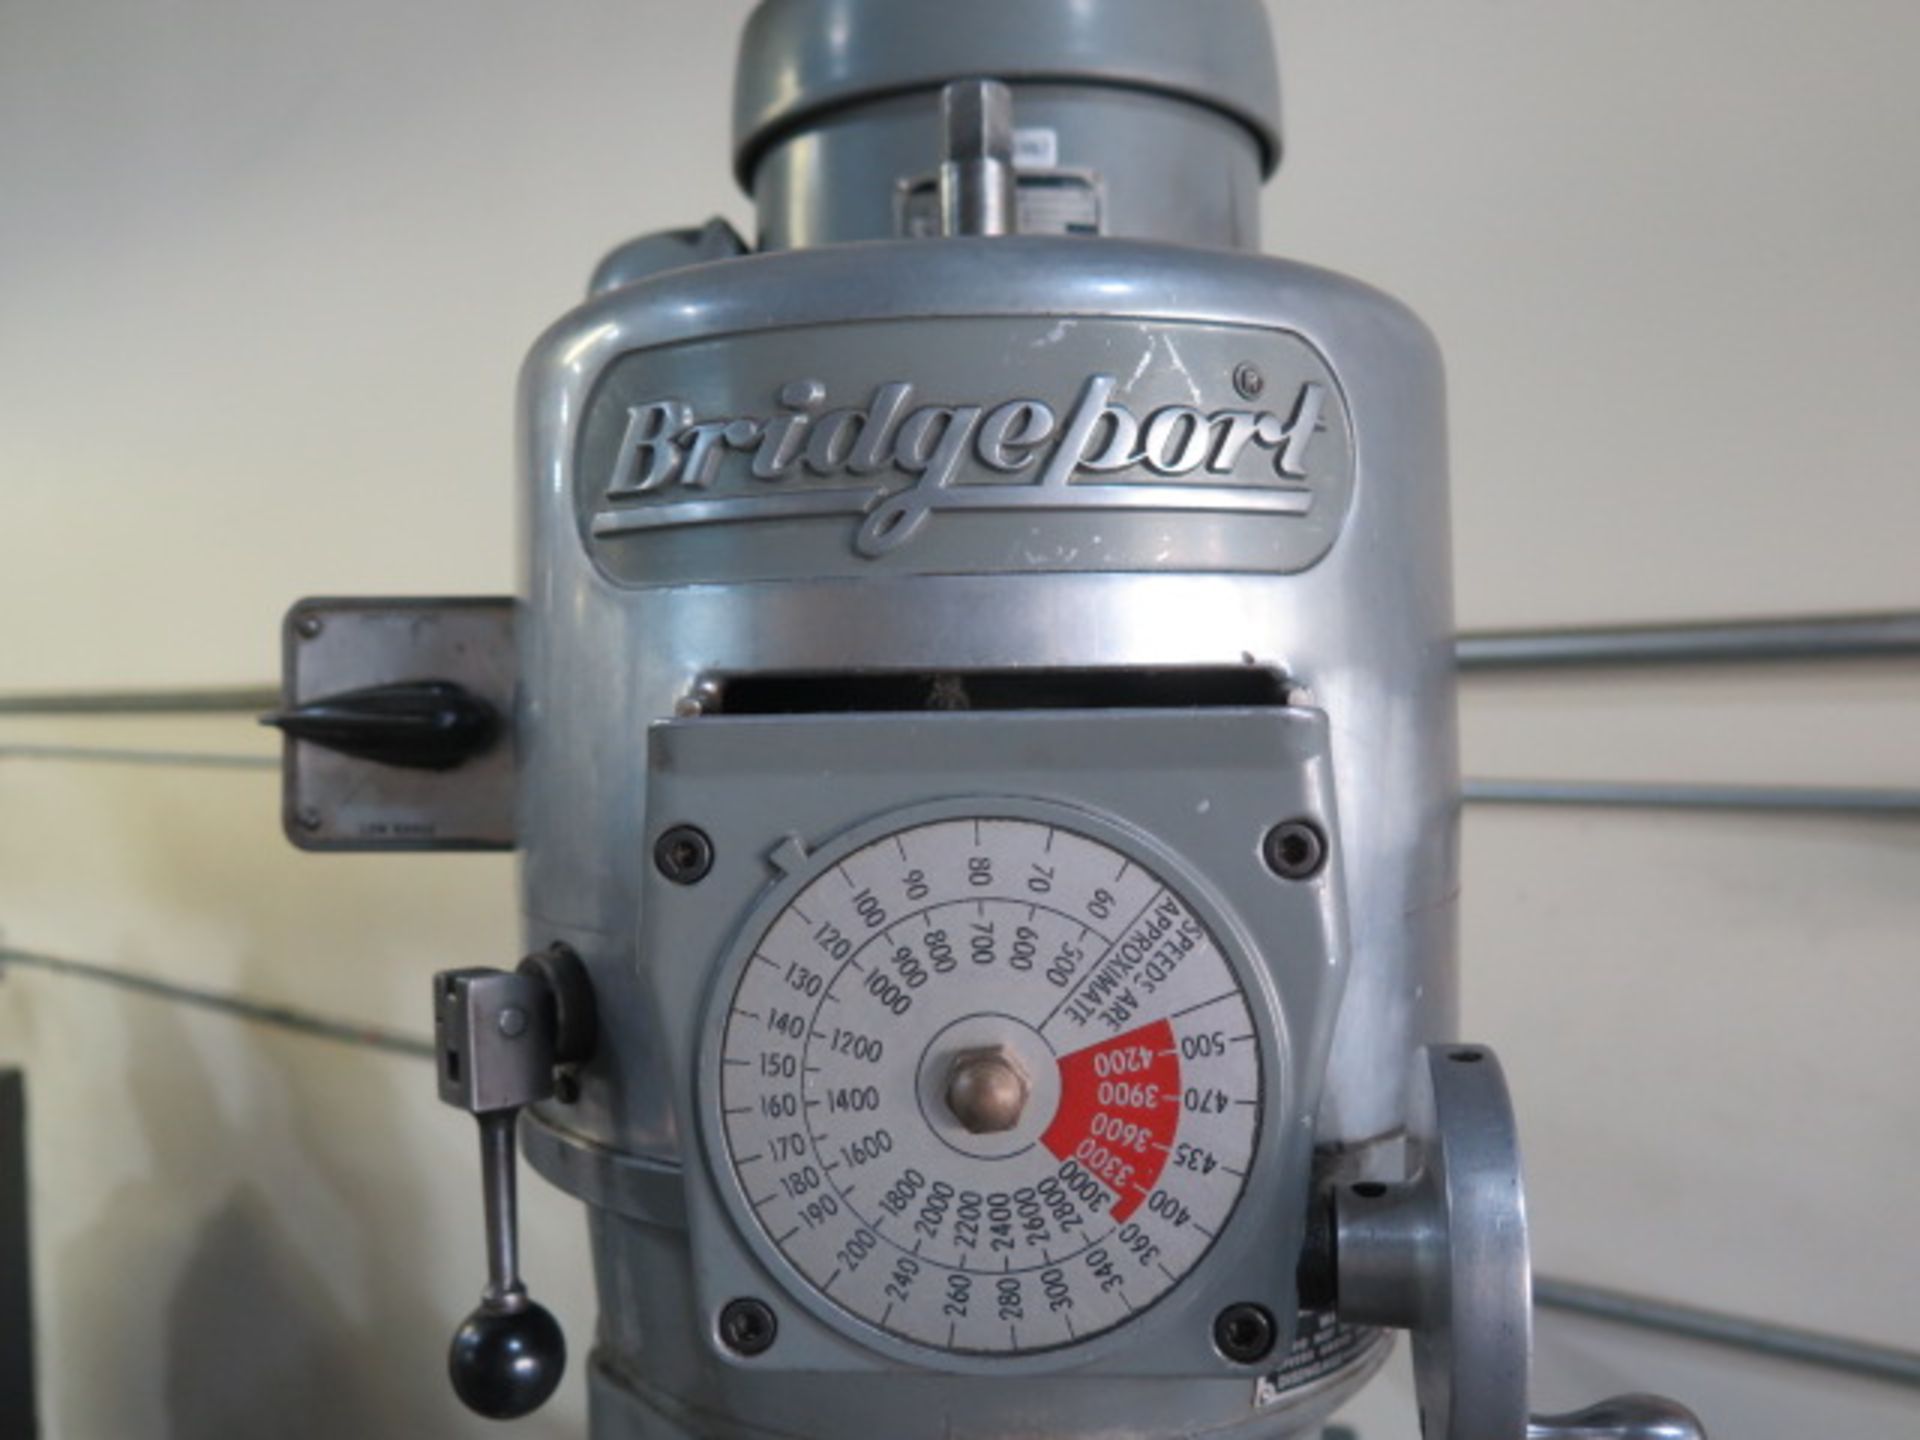 Bridgeport Vertical Mill s/n 151345 w/ 1.5Hp Motor, 60-4200 Dial Change RPM, Trava-Dial, Power Feed, - Image 3 of 11